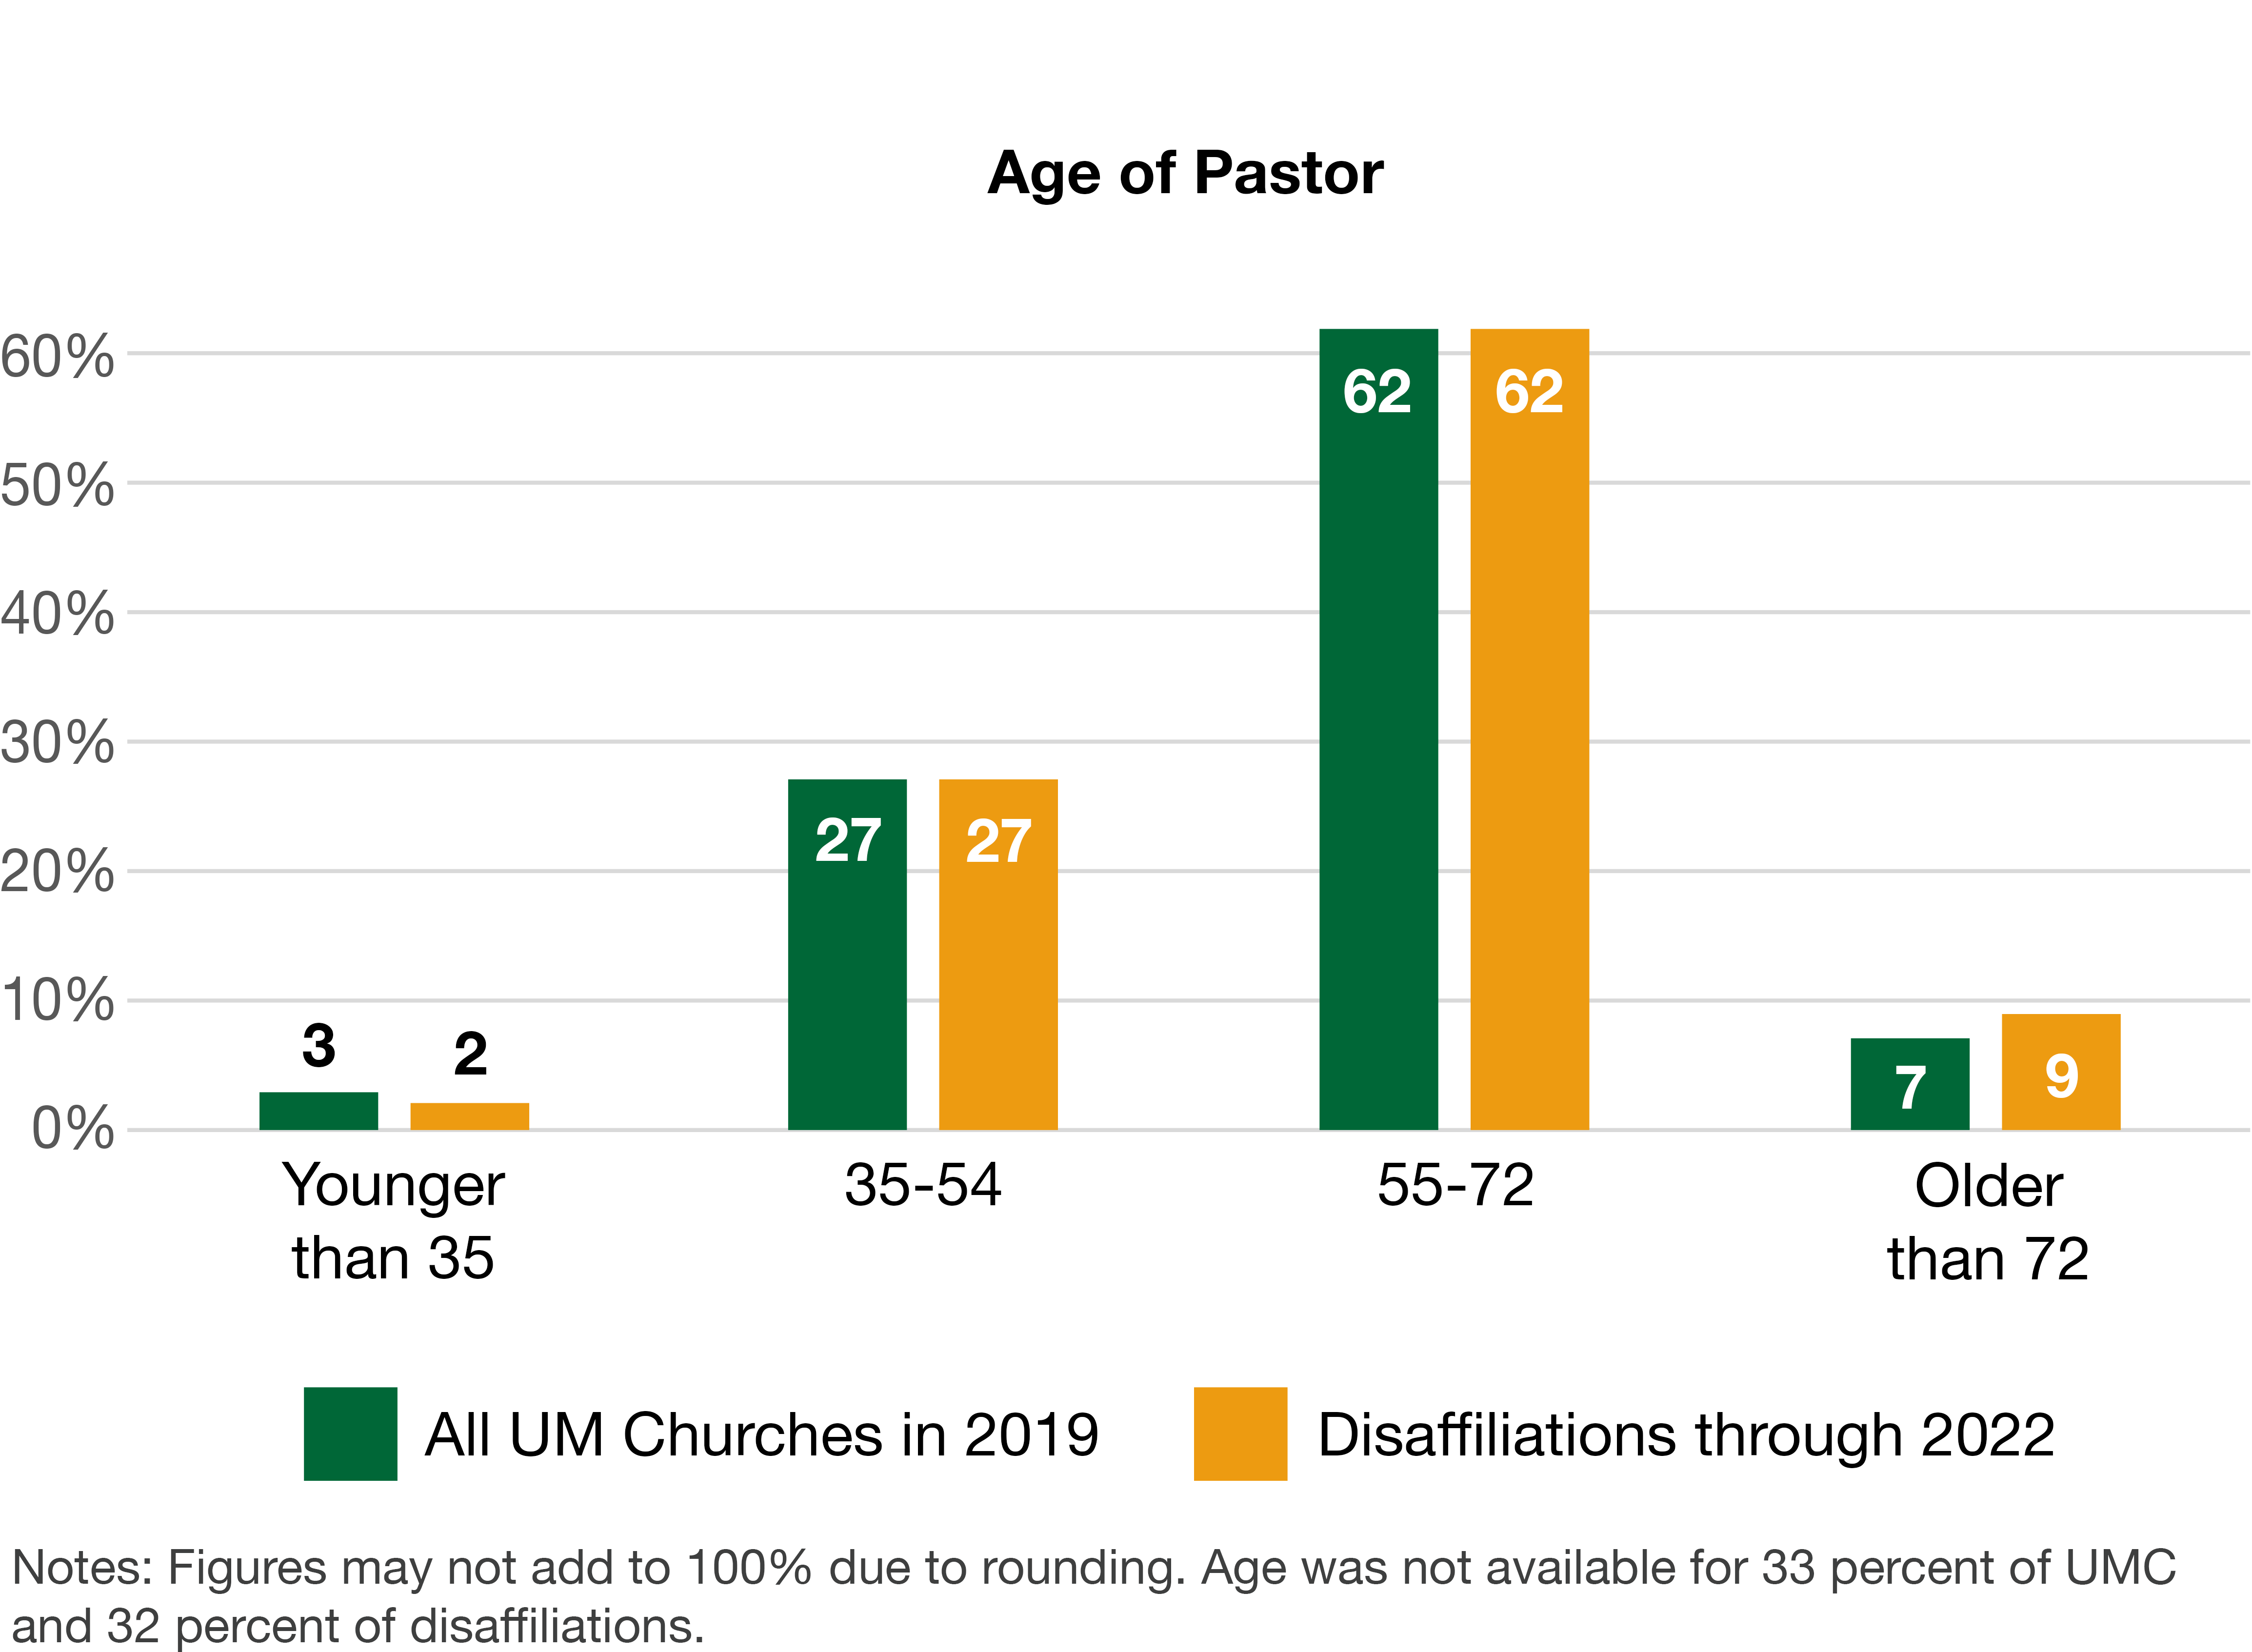 Age of Pastor bar graph